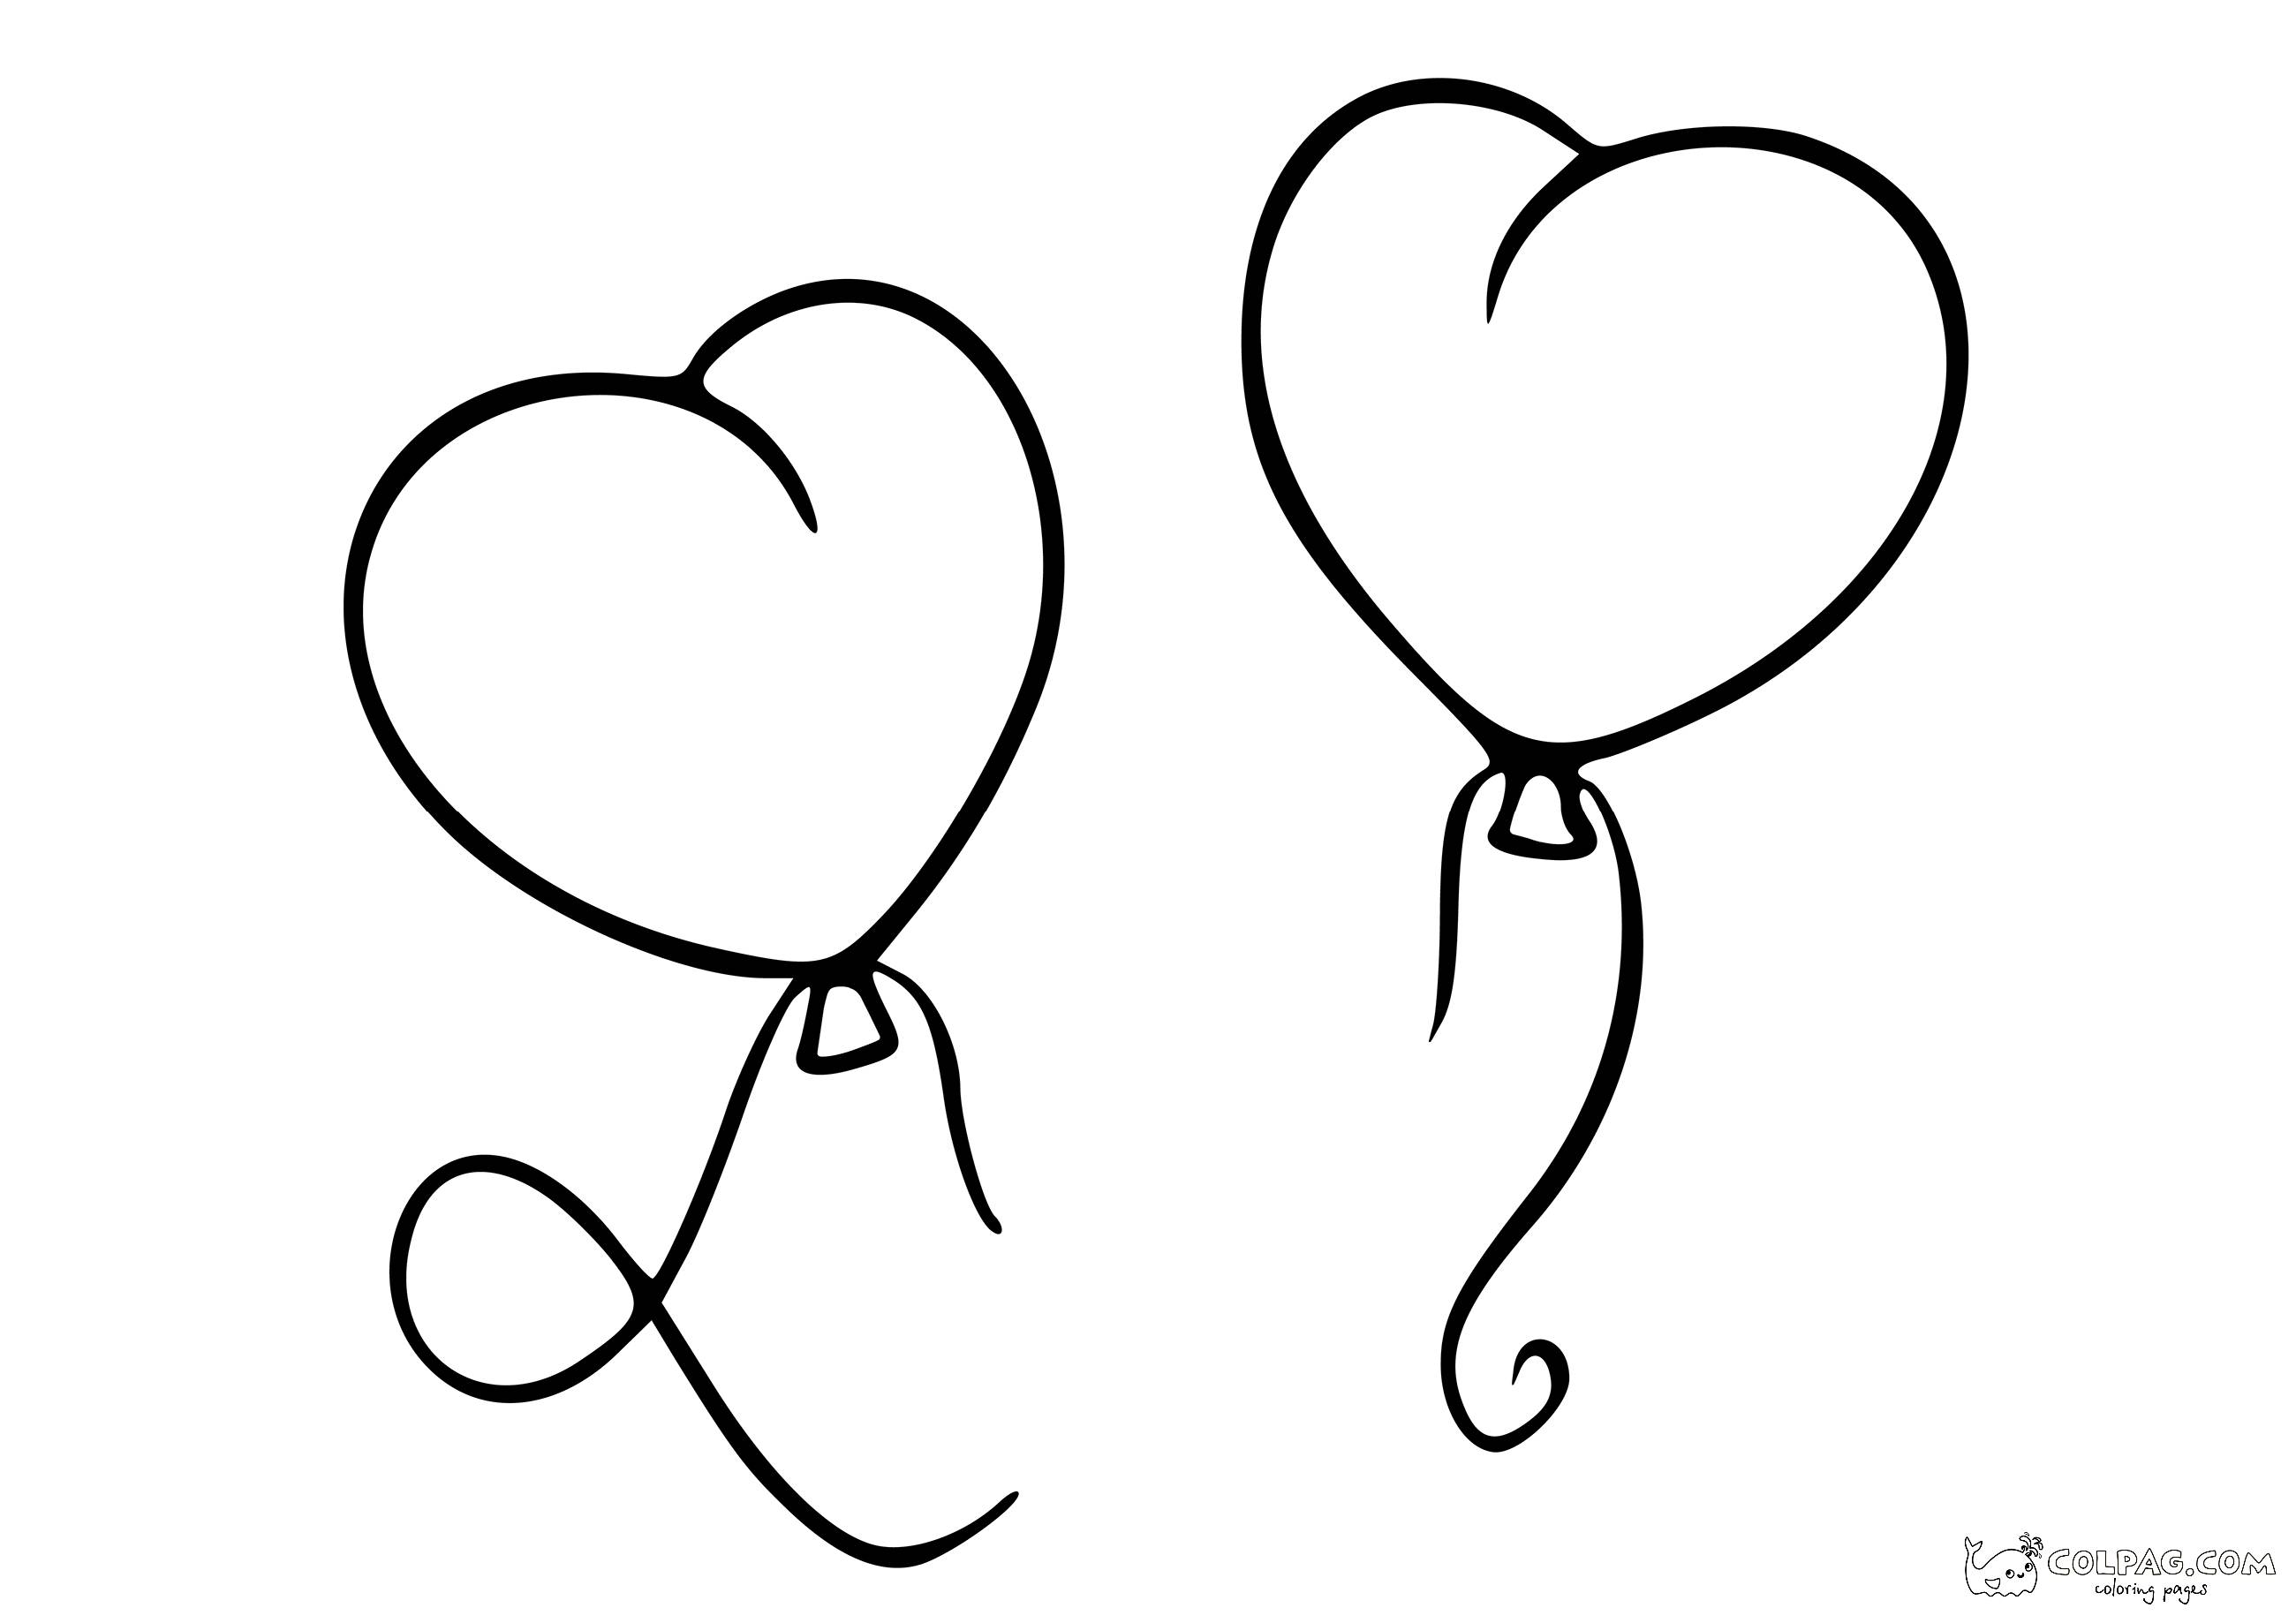 19-two-baloon-hearts-coloring-page-colpag-19